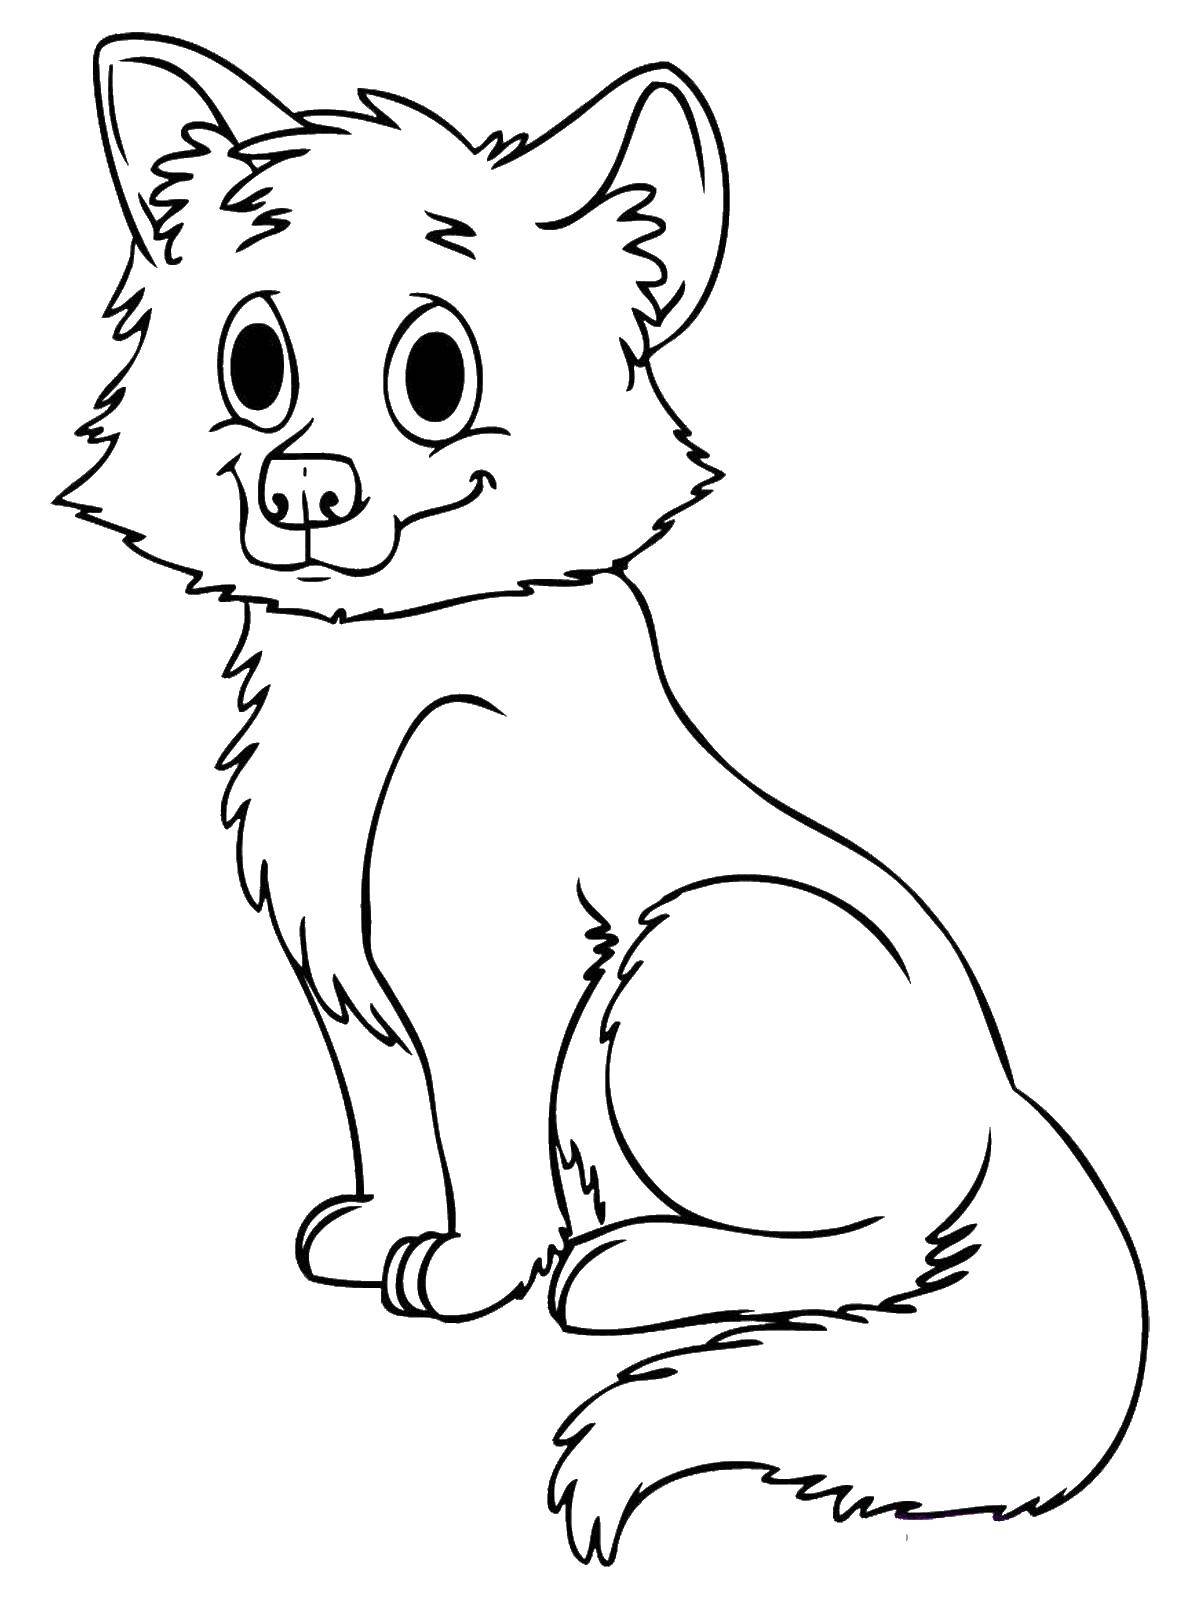 Coloring Little foxes. Category animals. Tags:  Animals, foxes.